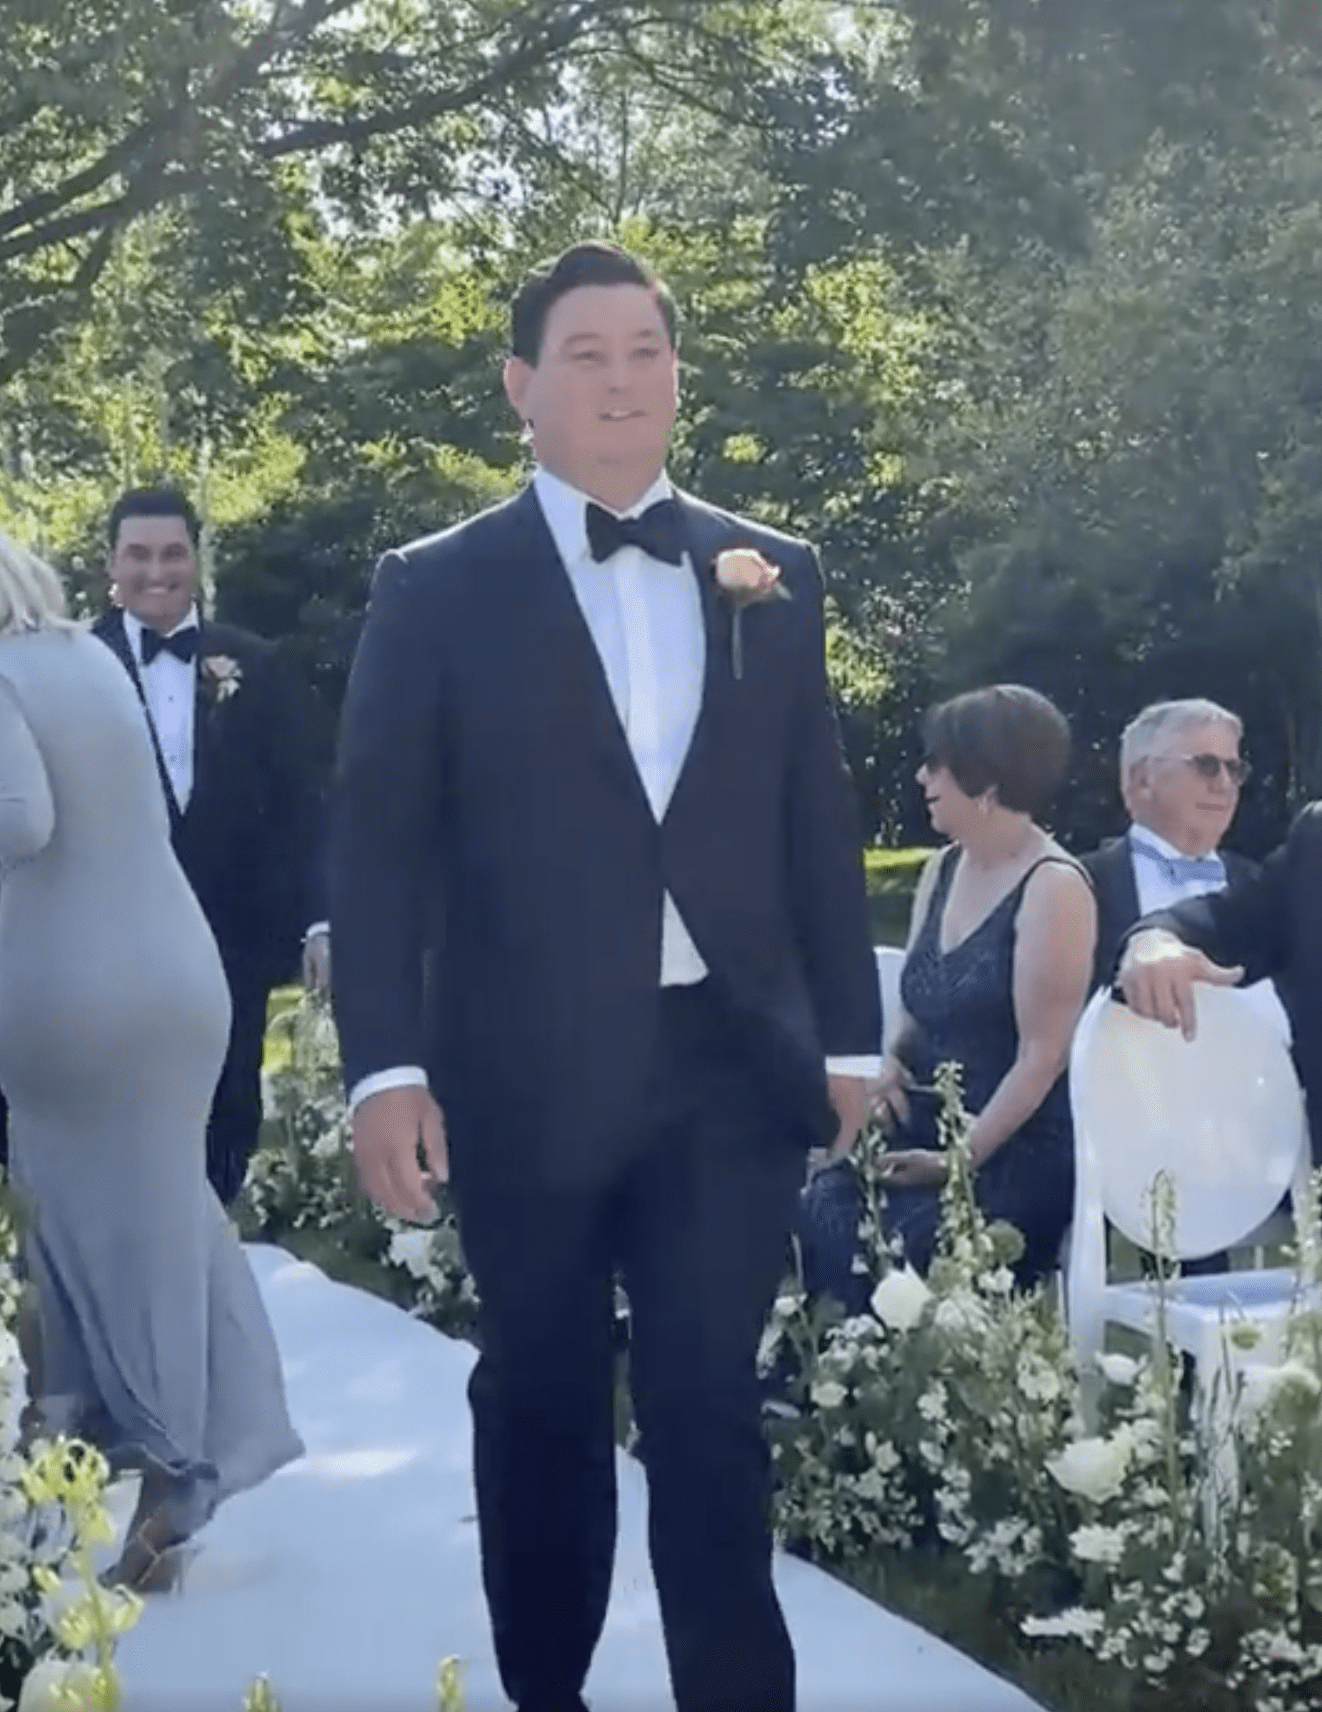 The groom is pictured walking down the aisle with one of his best men laughing in the background. | Source: reddit.com/r/weddingshaming